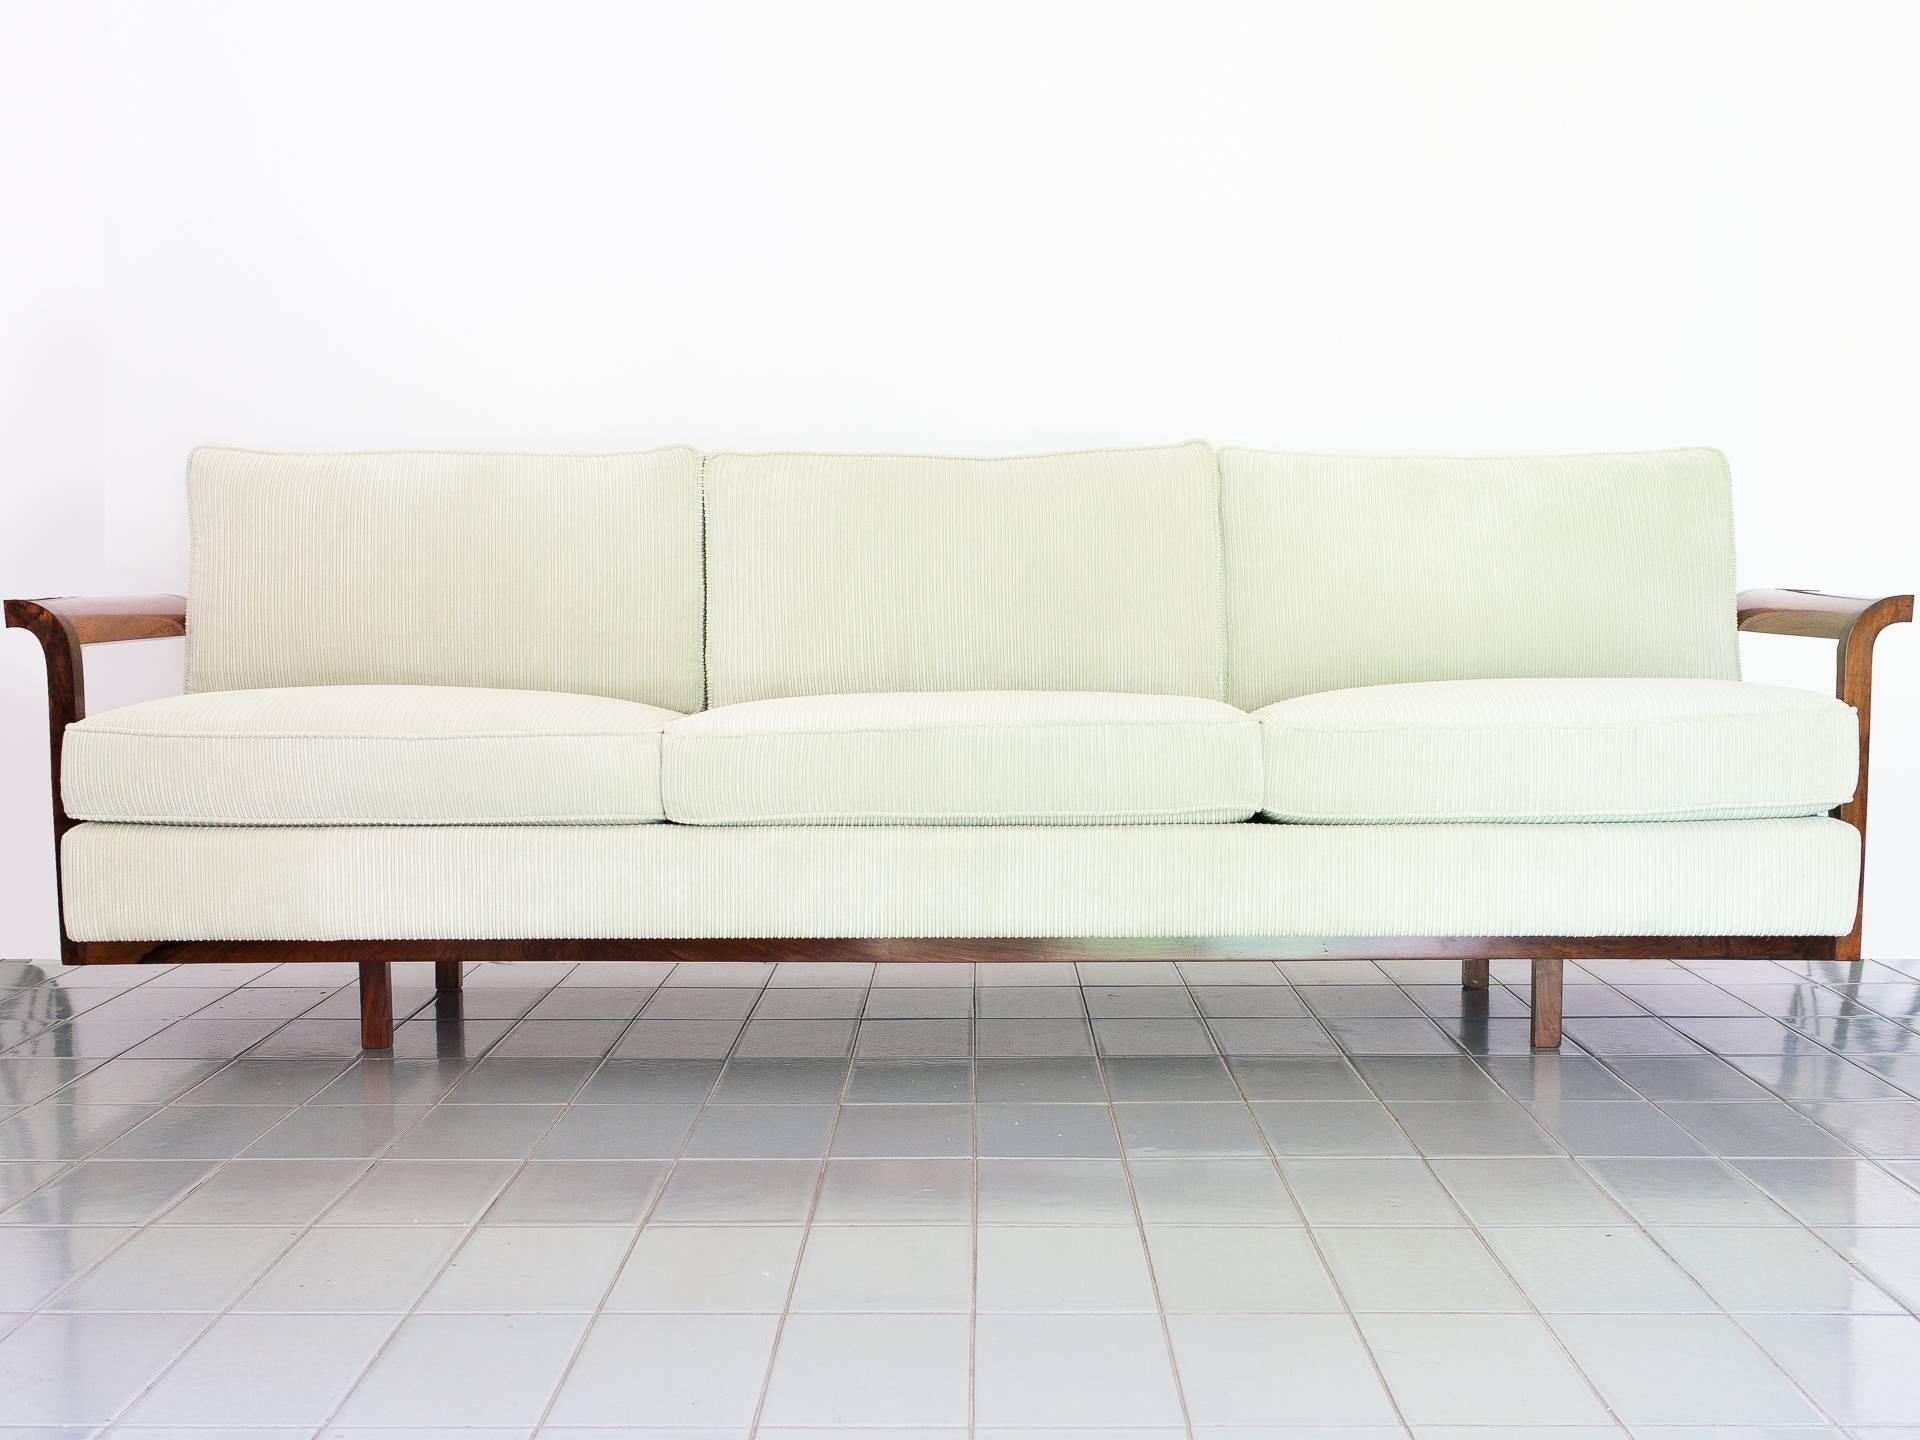 Designed by Carlos Millan in 1952, the M3 sofa is one of the most iconic pieces designed and produced by the 'Branco & Preto' collective. 

The simple style can almost be called 'transitional' from the Deco era, with the subtle arms curves and the